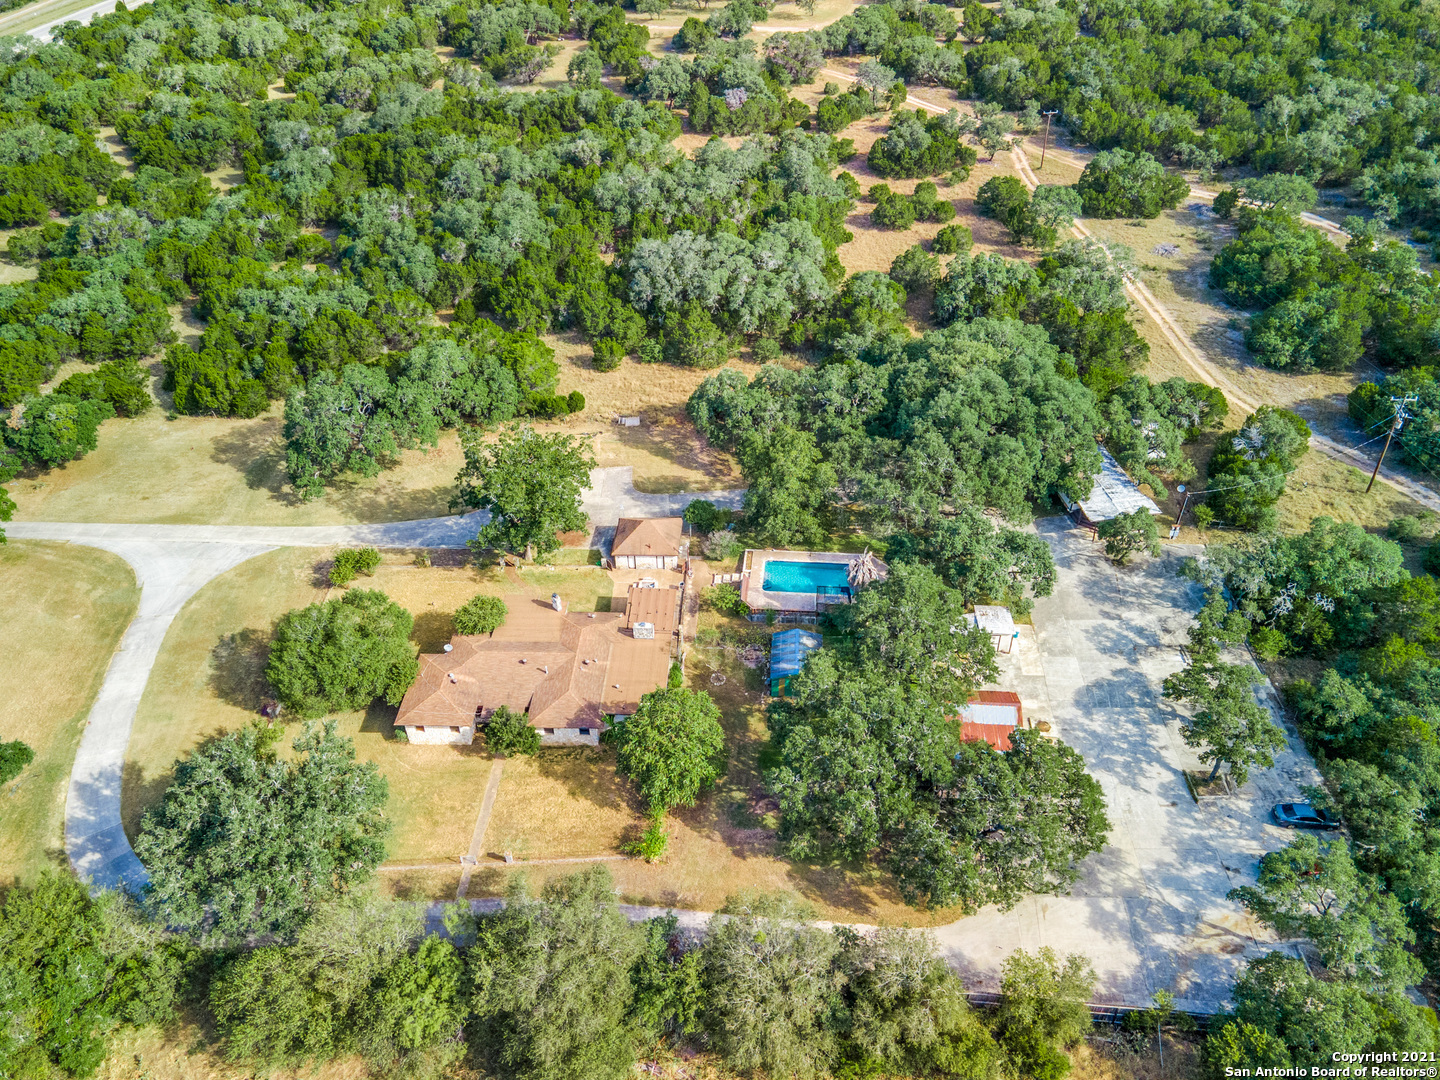 Have you ever wanted your own compound minutes from Sone Oak? Here is your chance. Private and secluded, country-like property on 2.5 acres with single story home + two detached workshops, swimming pool, green house, 1465 sq. feet mobile home and plenty of parking for RV's and boats. Property is located outside the City limits, but minutes from within Stone Oak and 1604. Main home features 3 living areas, 2 wood burning fireplaces, a huge master retreat and all surrounded by grand oak trees.